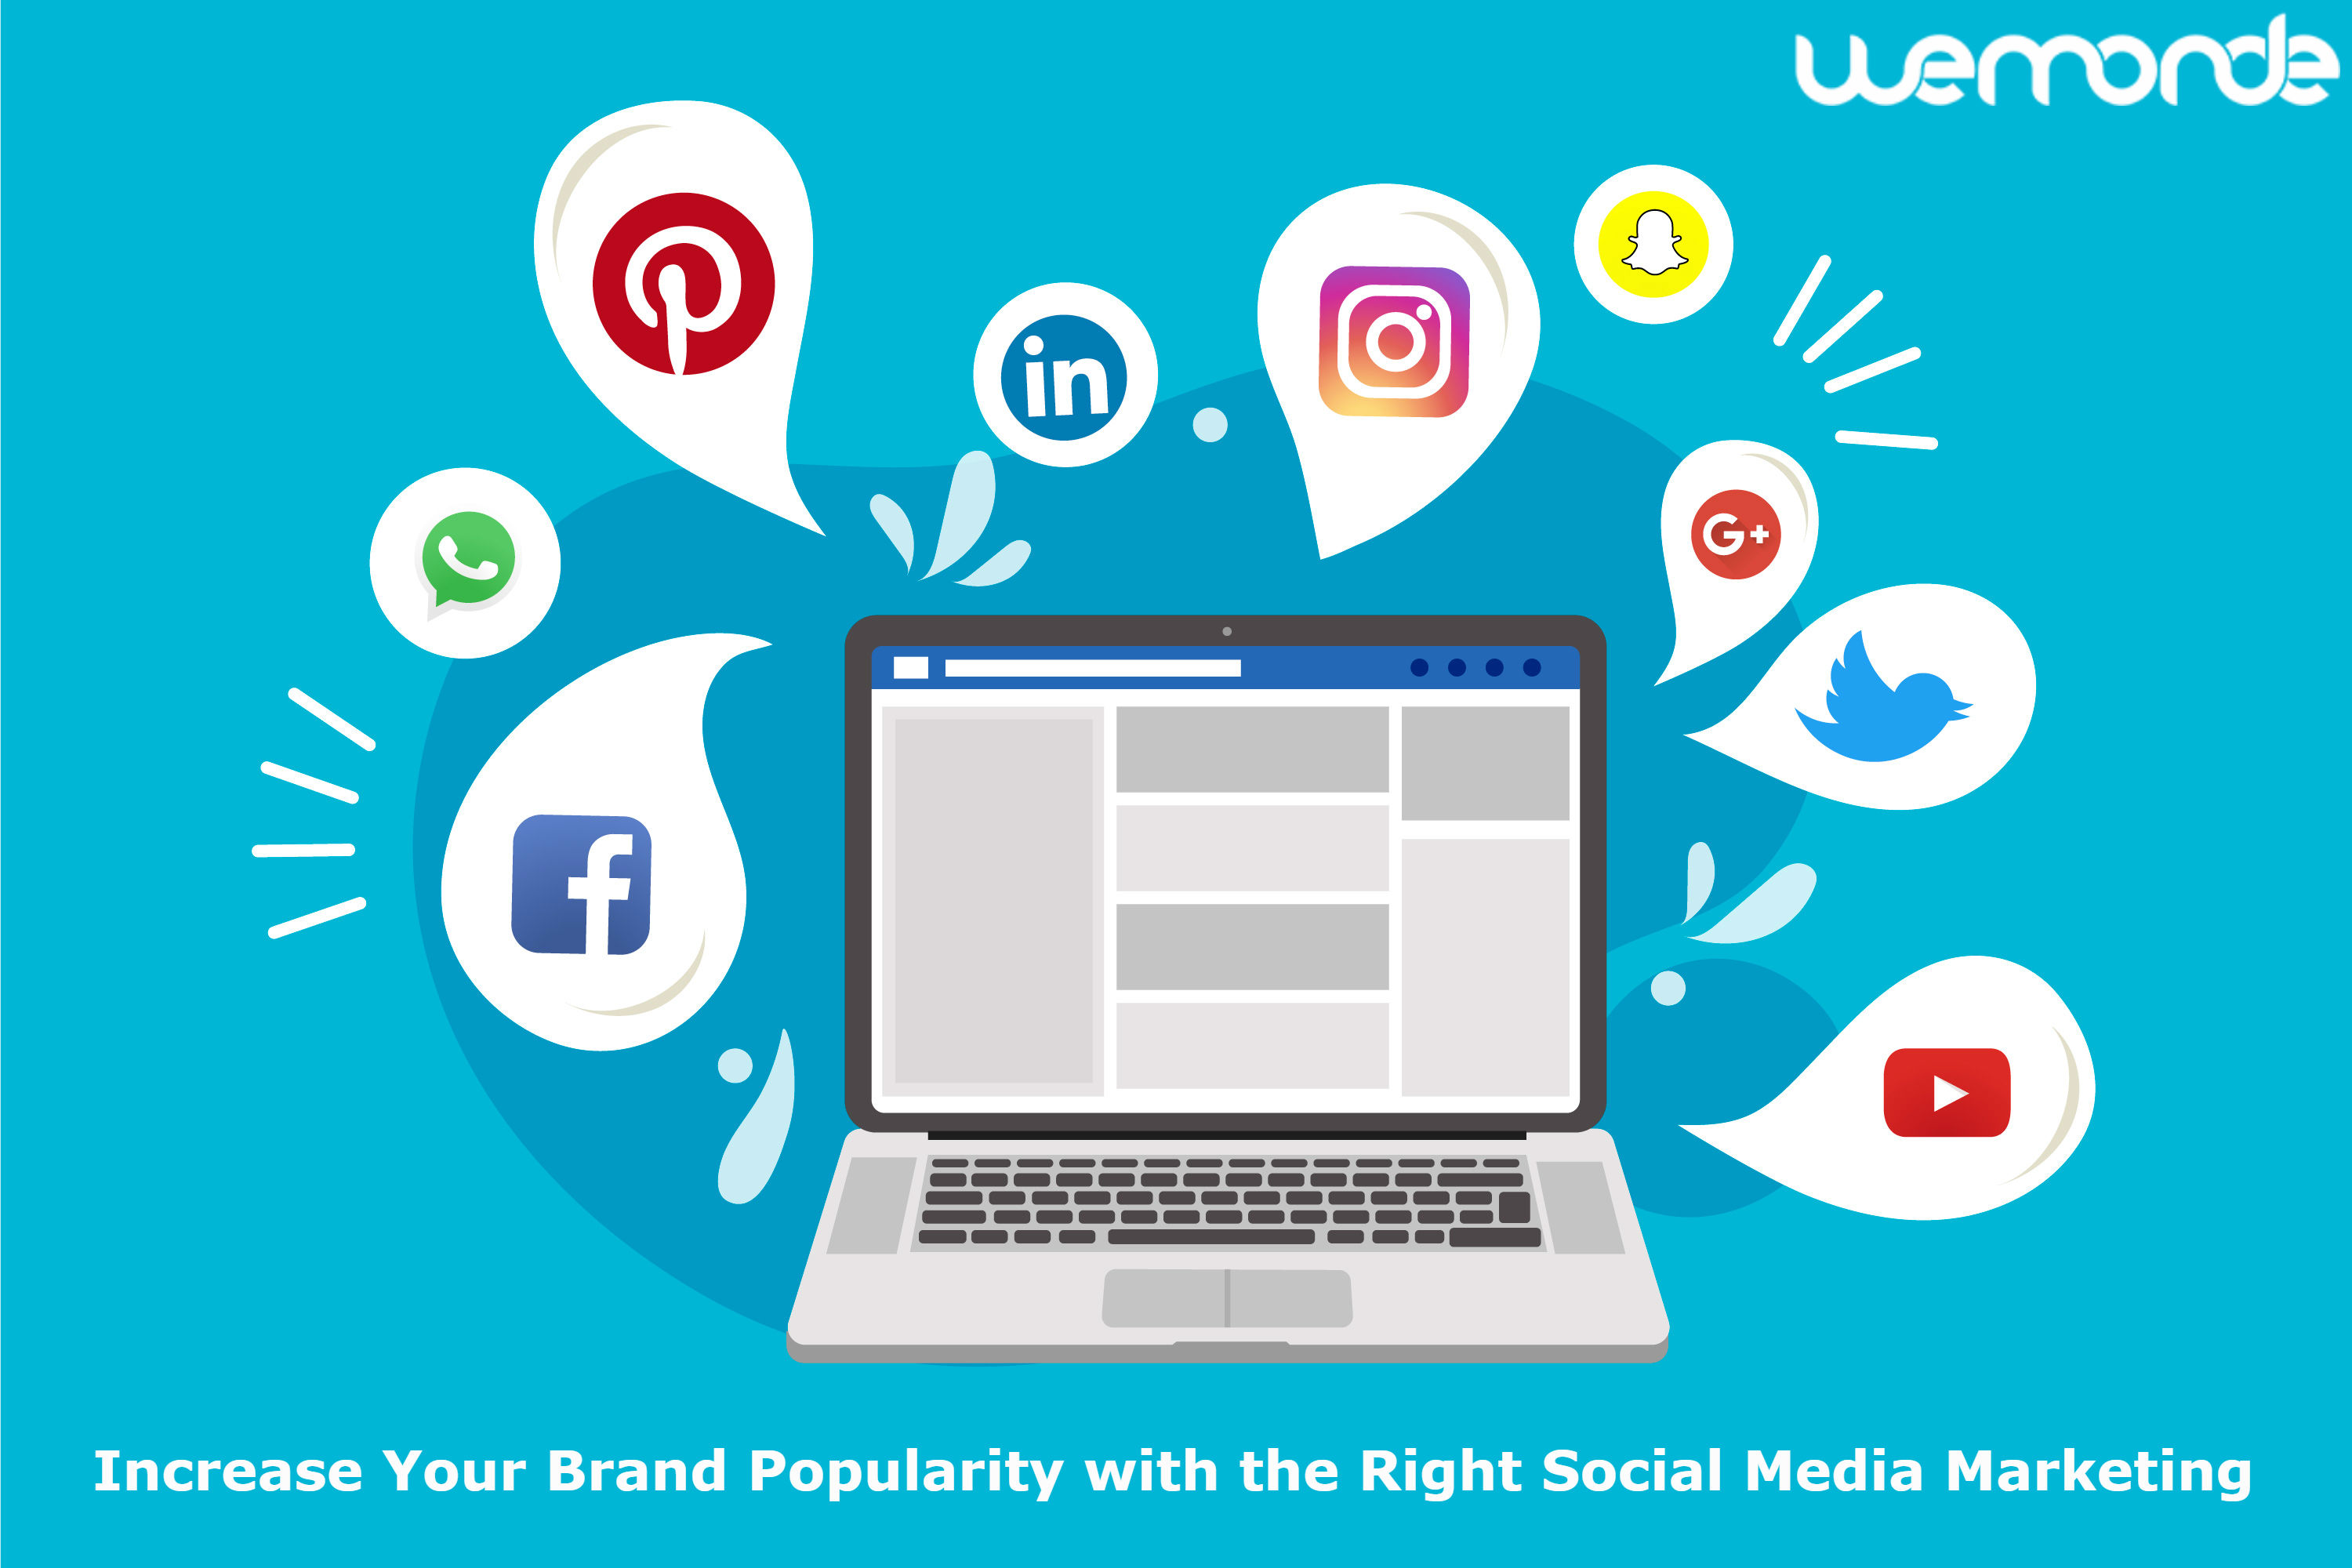 Increase Your Brand Popularity with the Right Social Media Marketing